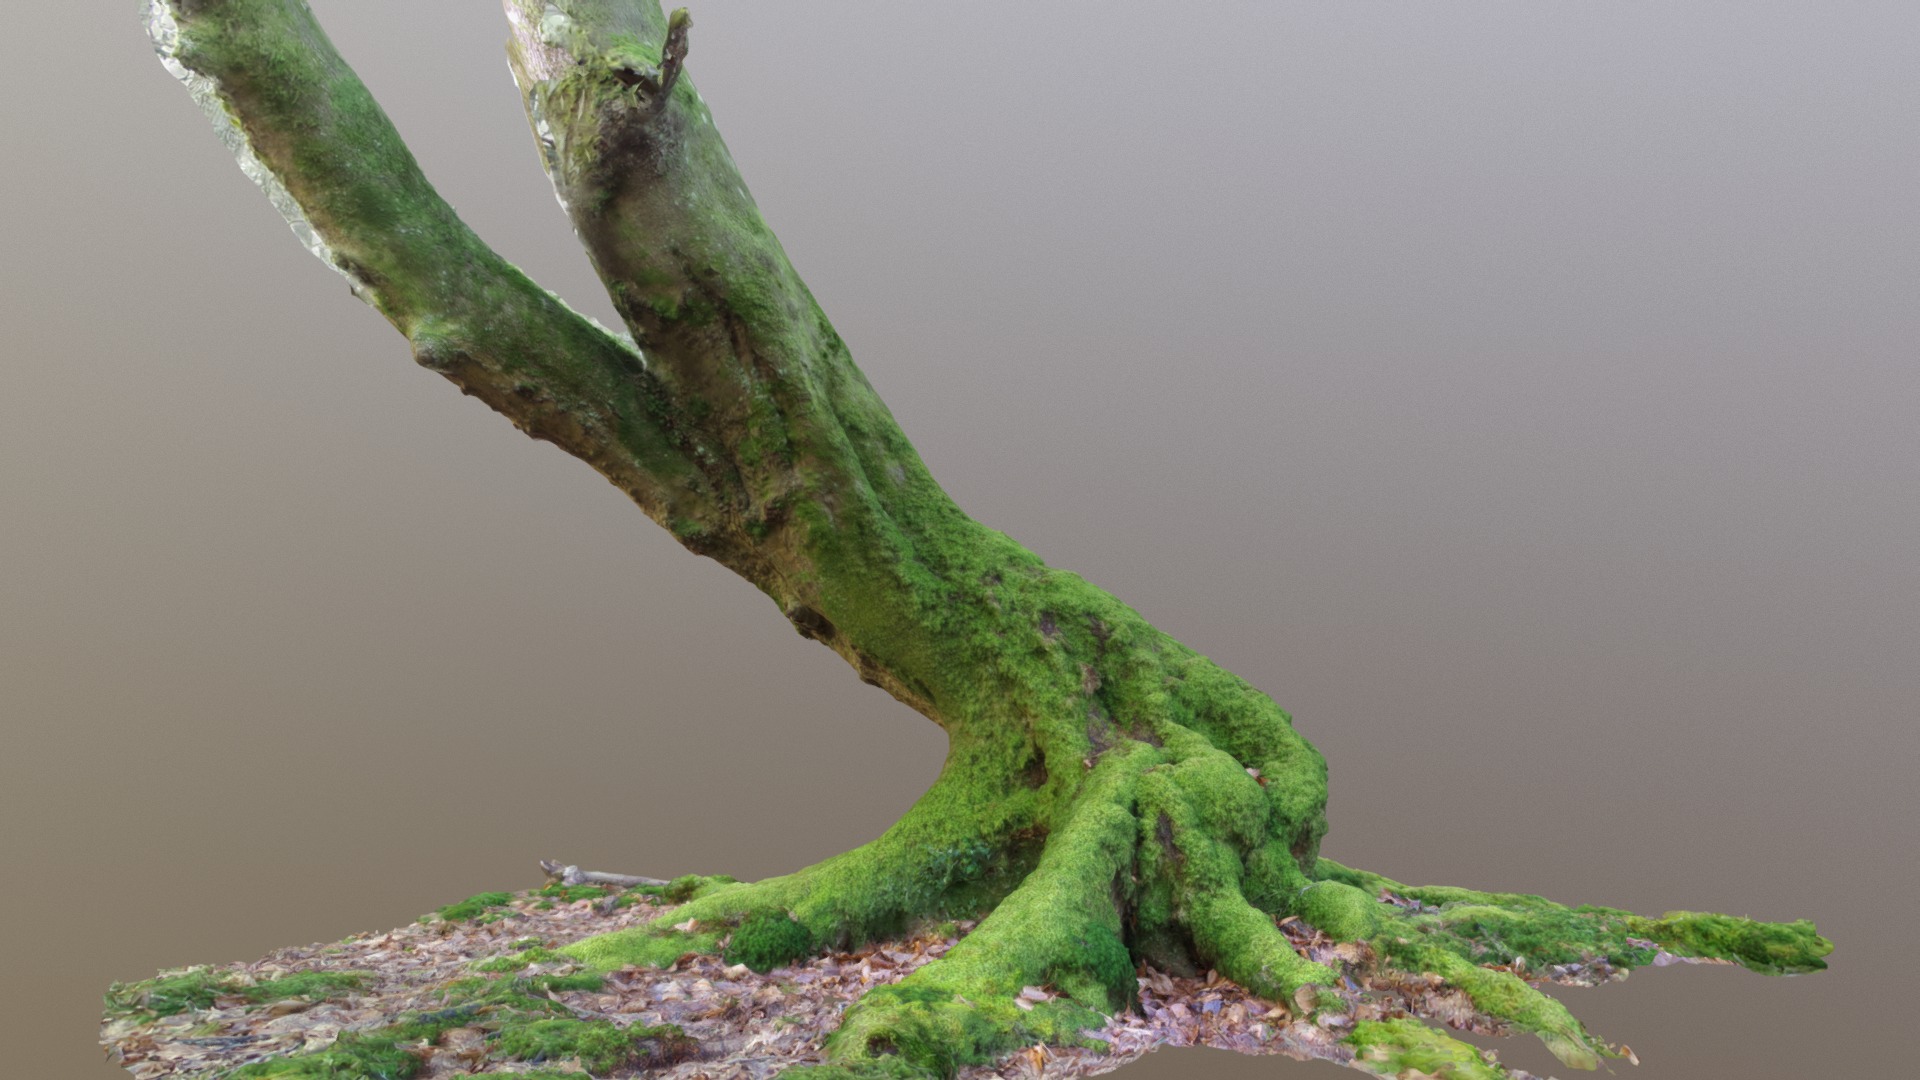 3D model Curvy Mossy Beech Tree - This is a 3D model of the Curvy Mossy Beech Tree. The 3D model is about a tree branch with moss growing on it.